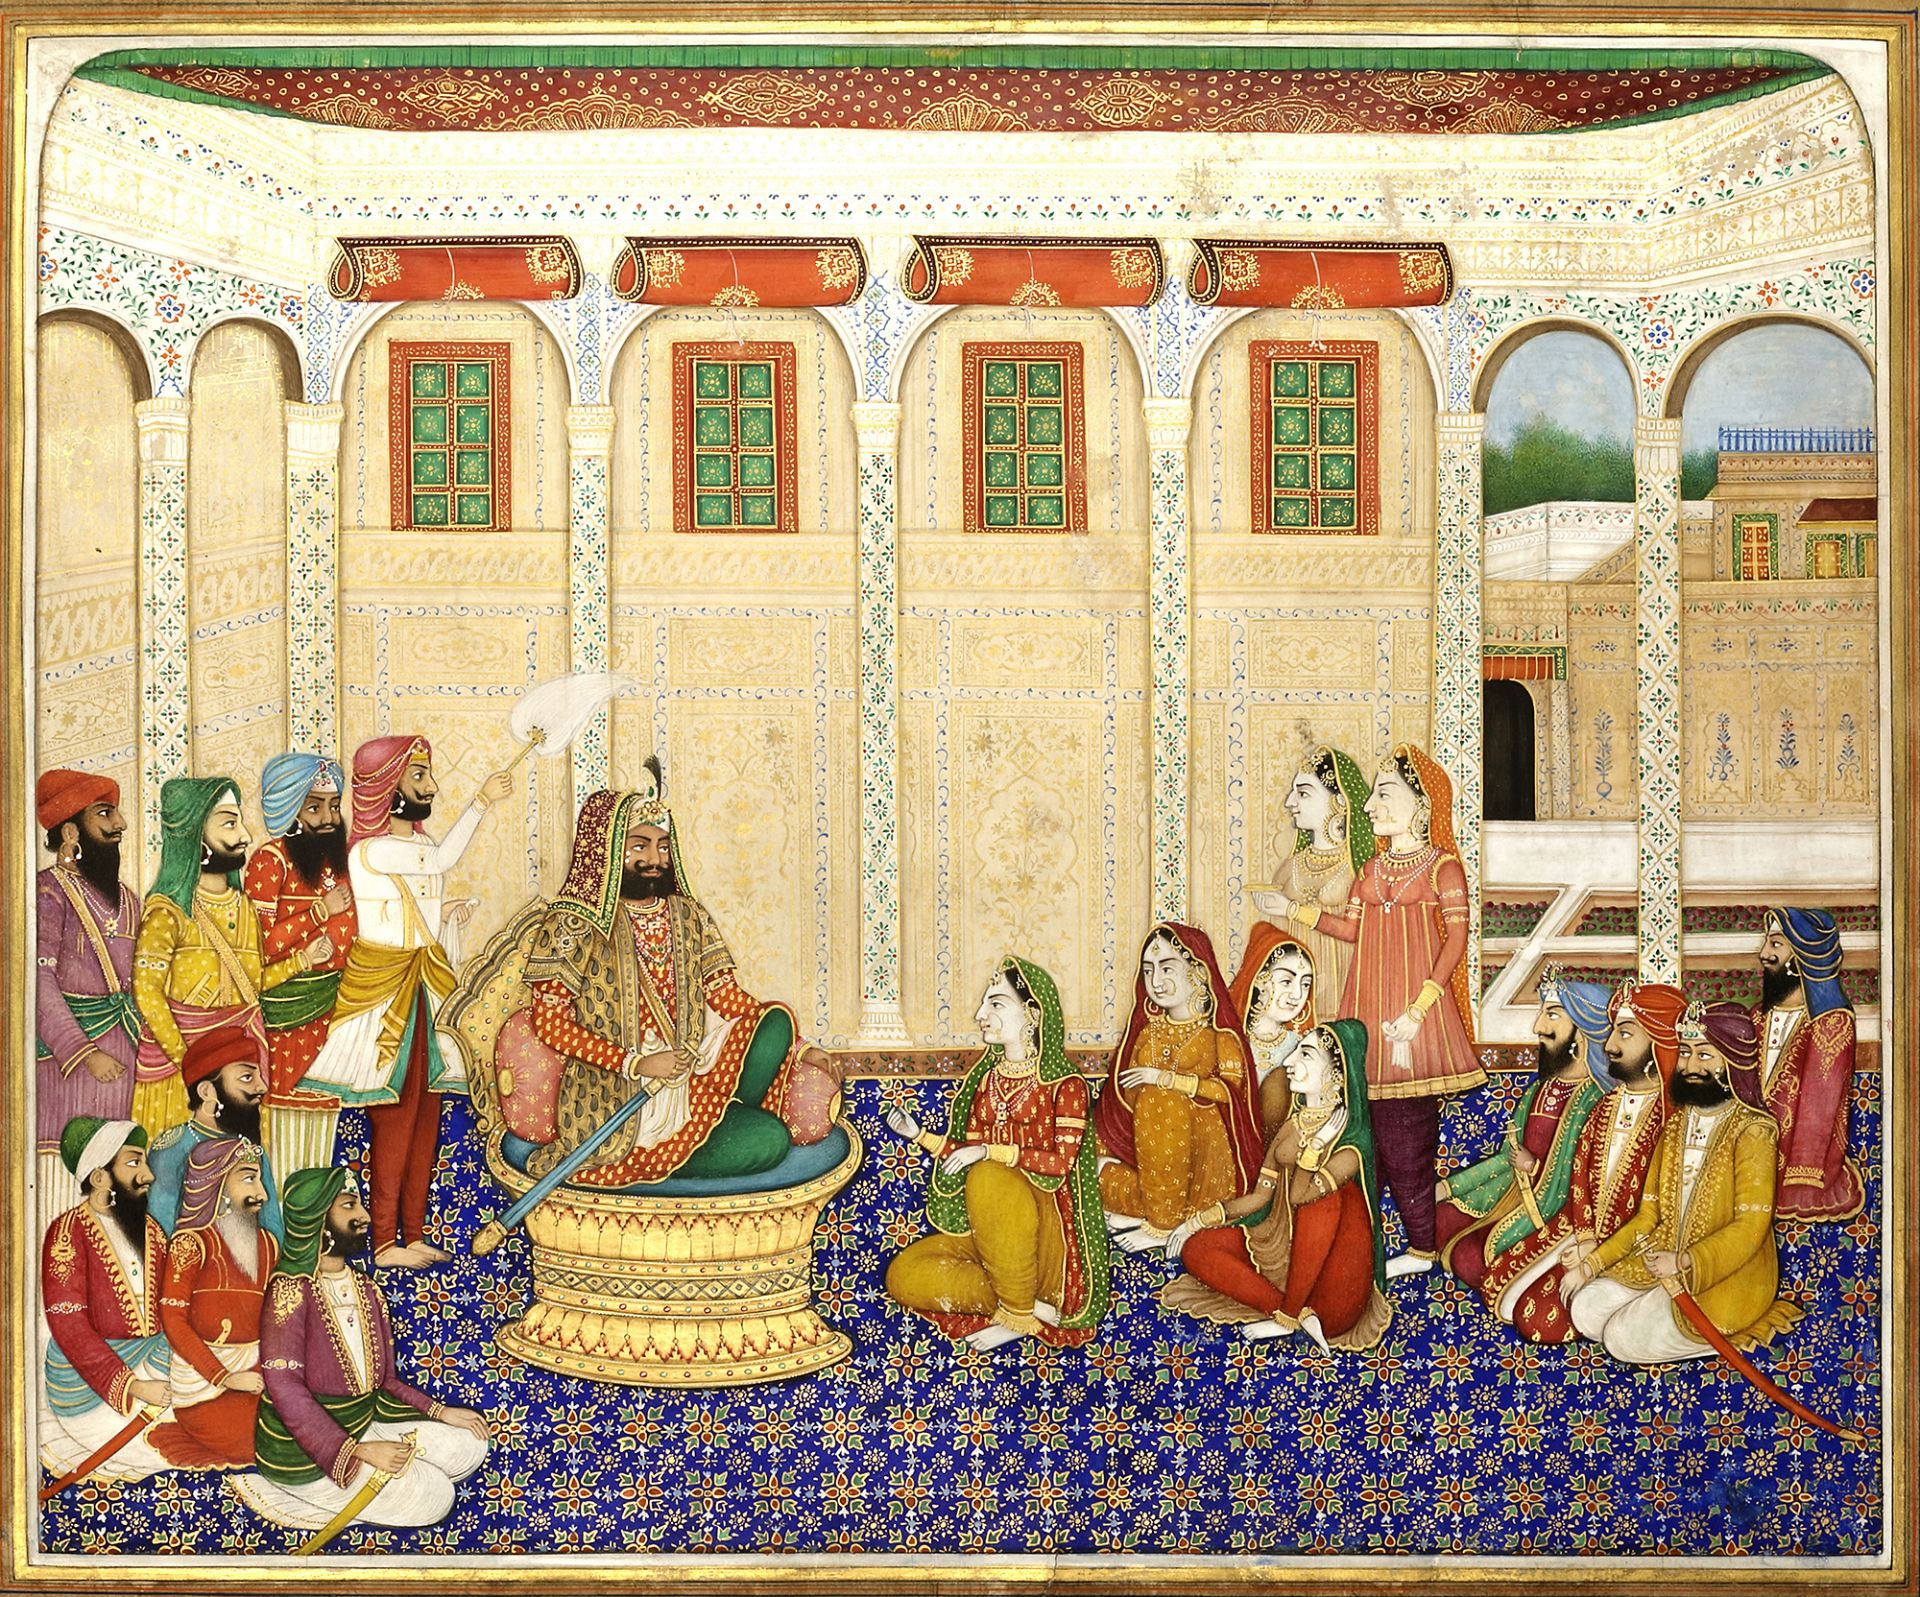 MAHARAJA SHER SINGH IN DURBAR (B. 1807-D.1843), ENTHRONED WITH ATTENDANTS, ATTRIBUTED TO BISHEN SING